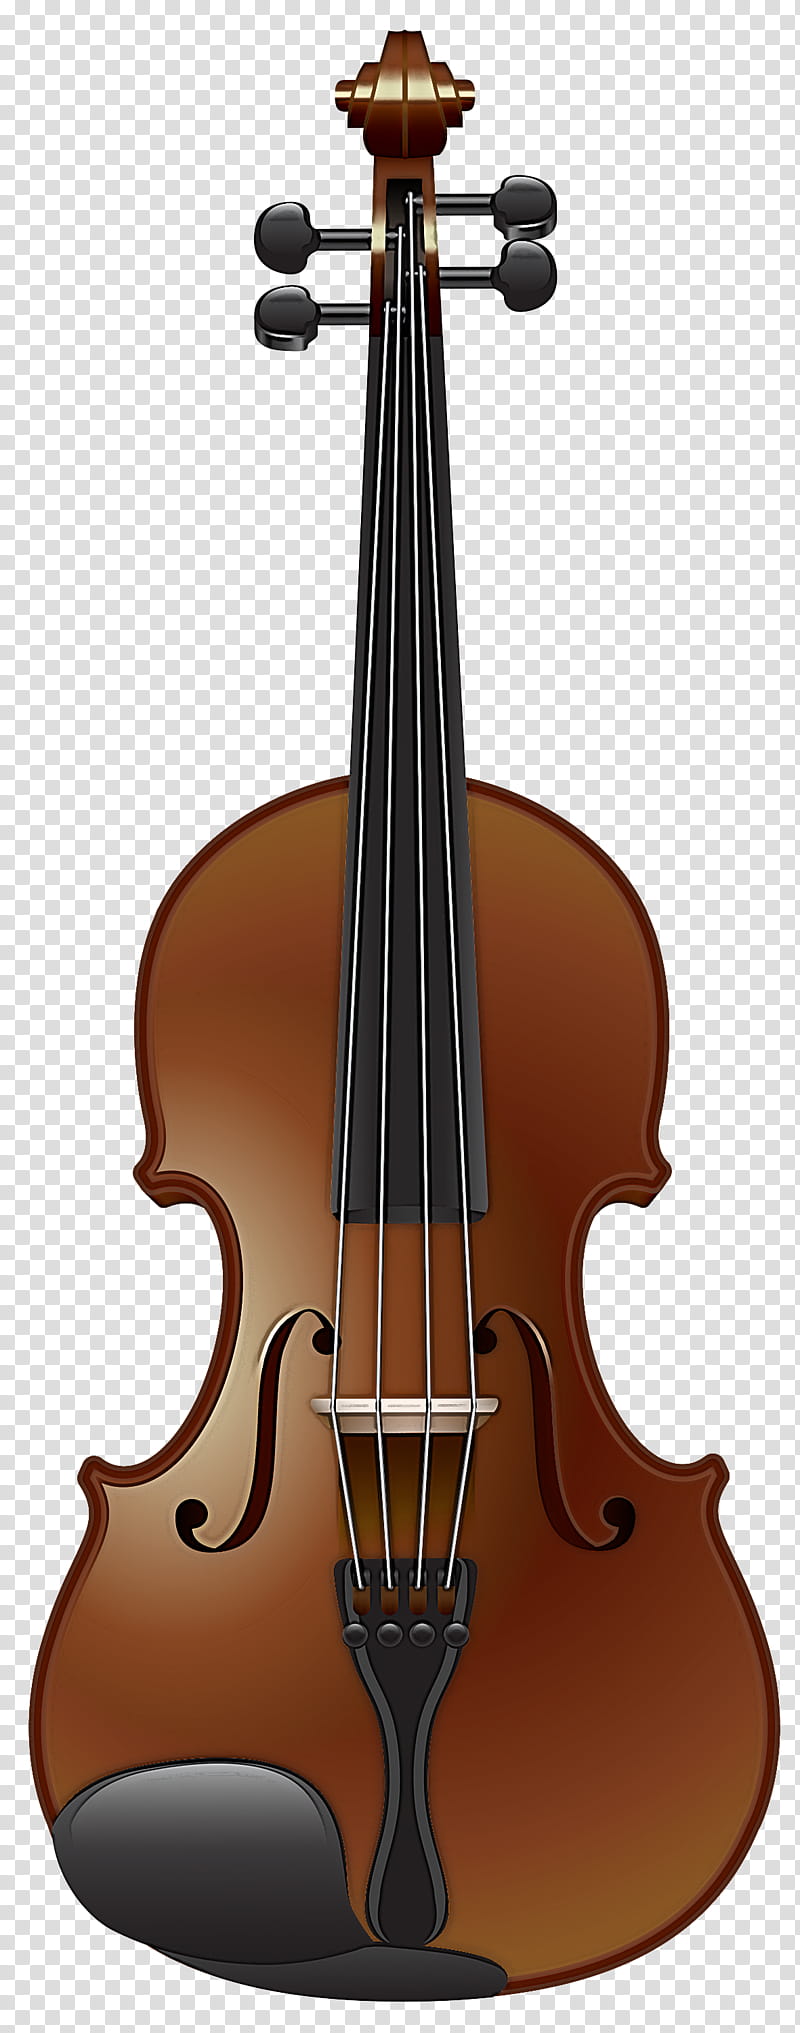 string instrument musical instrument string instrument violin family viola, Violone, Bass Violin, Tololoche transparent background PNG clipart